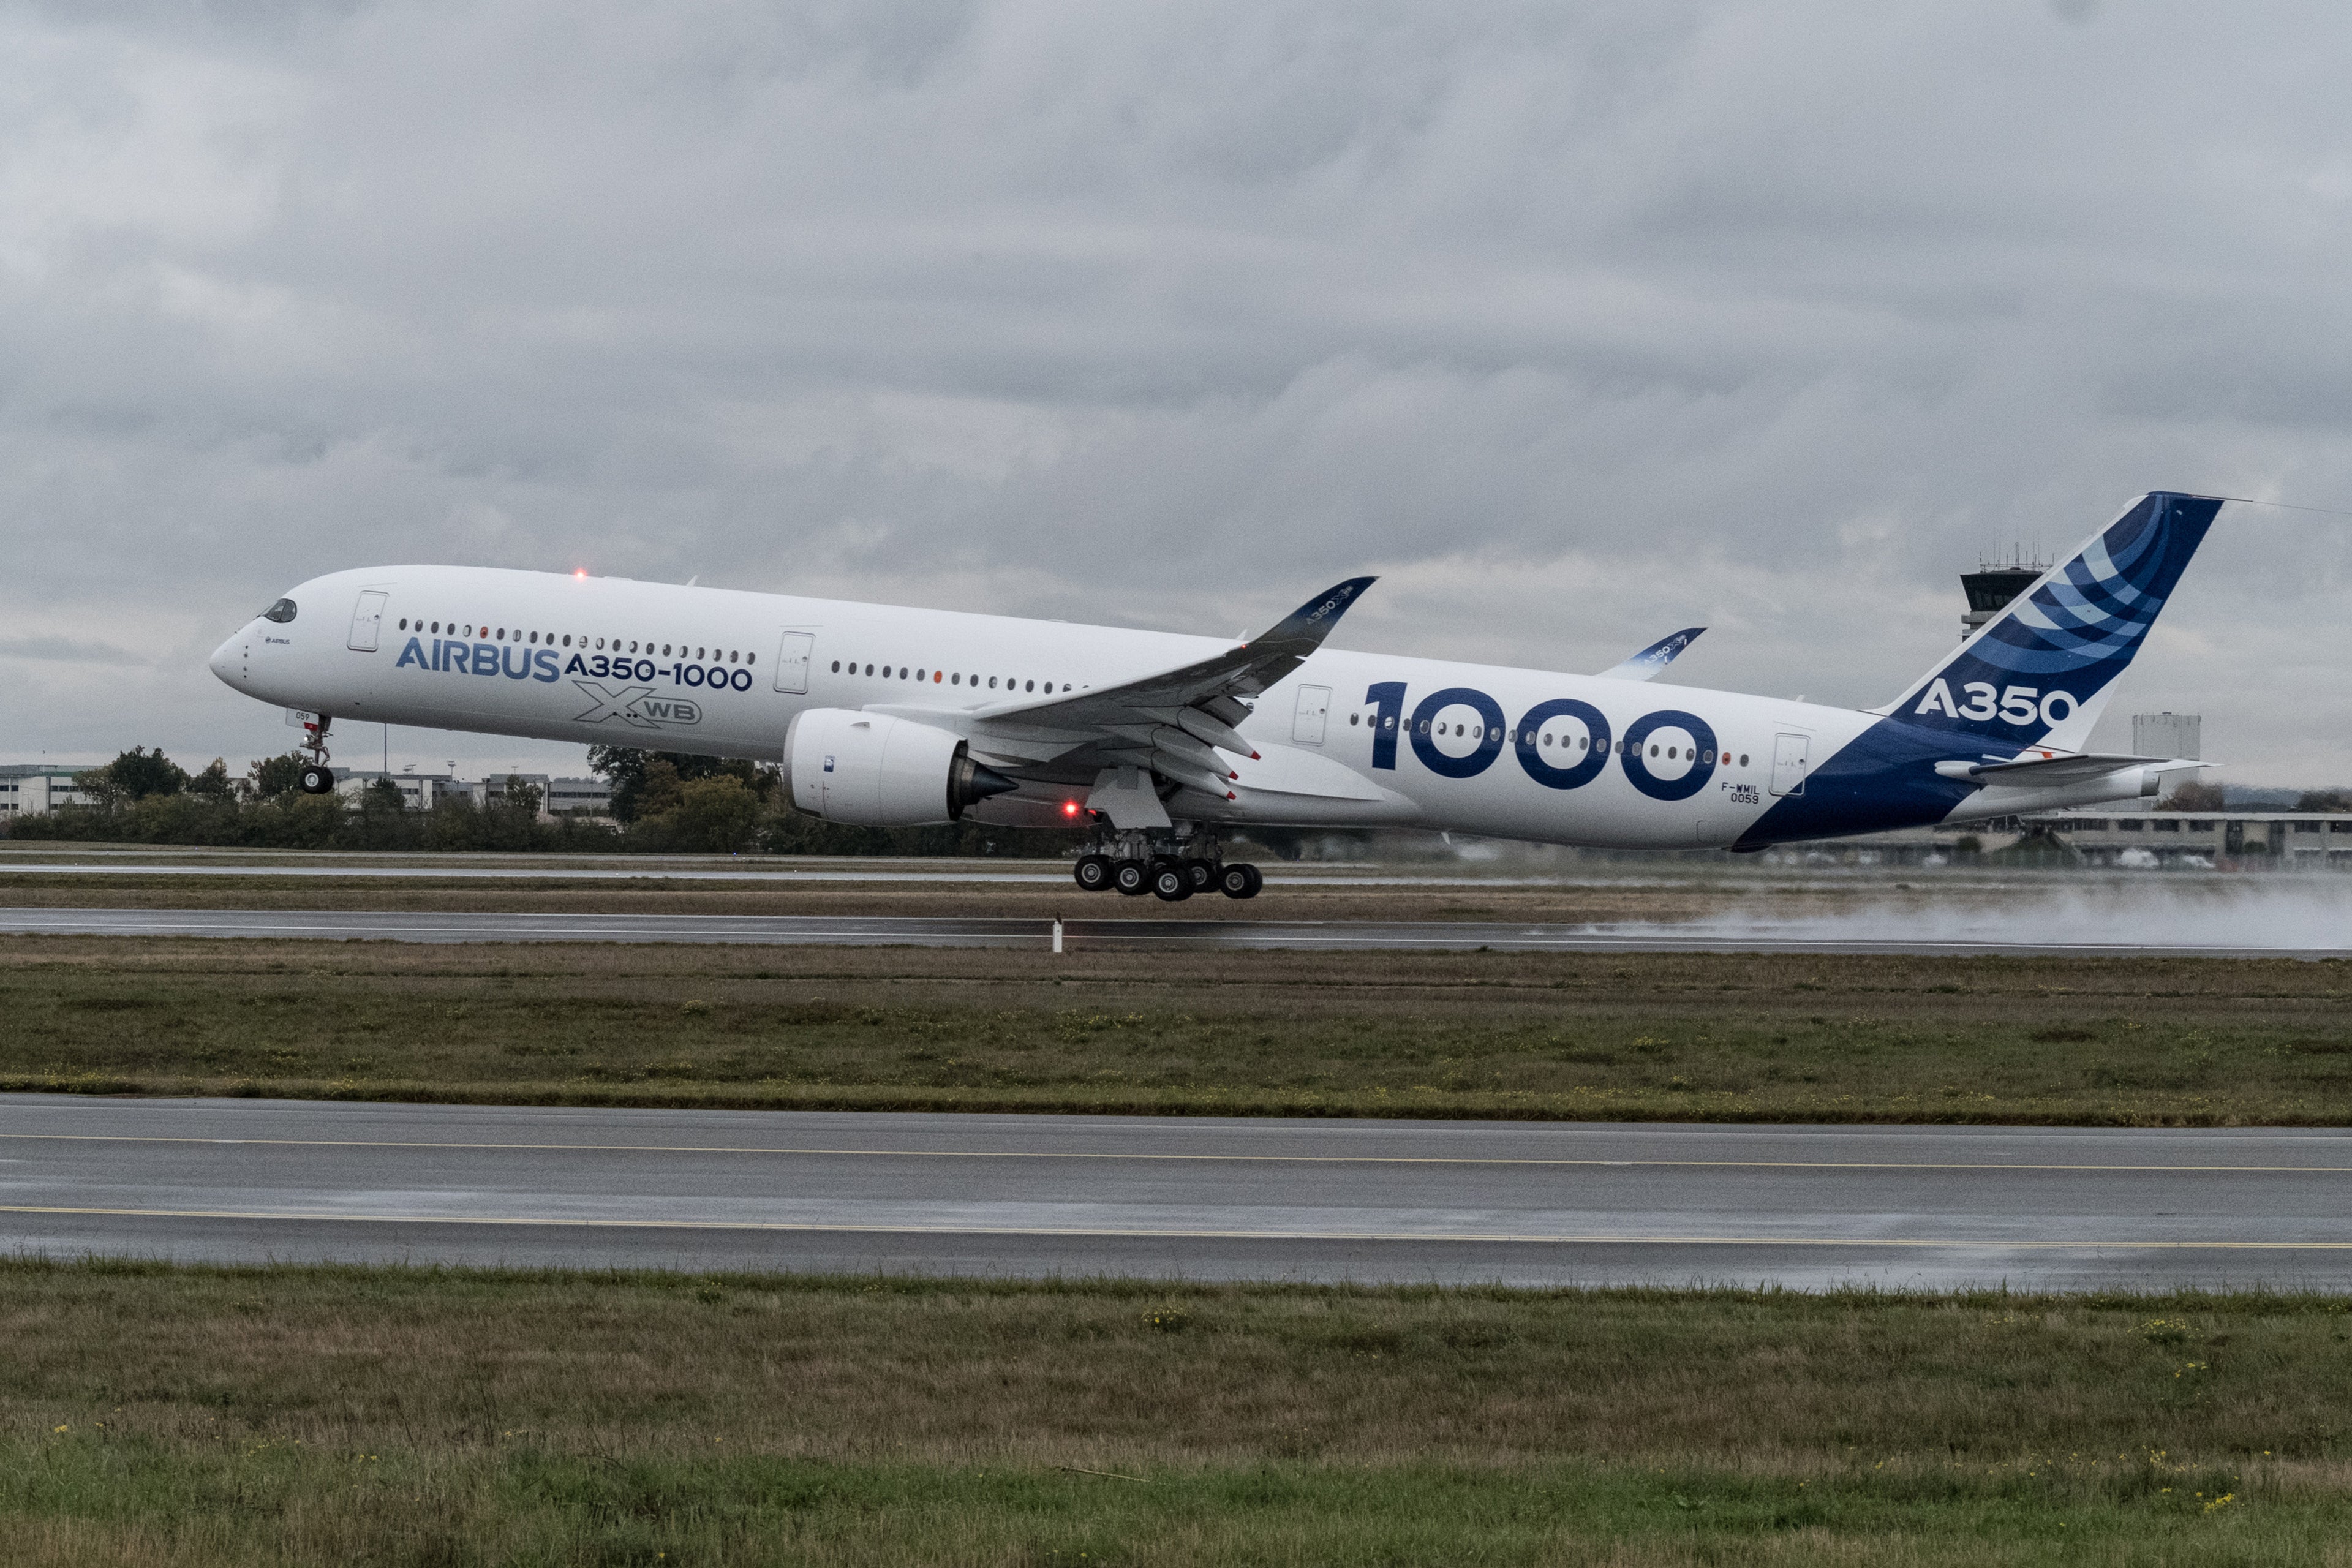 Airbus Group SE's A350-1000 Passenger Jet Makes First Flight